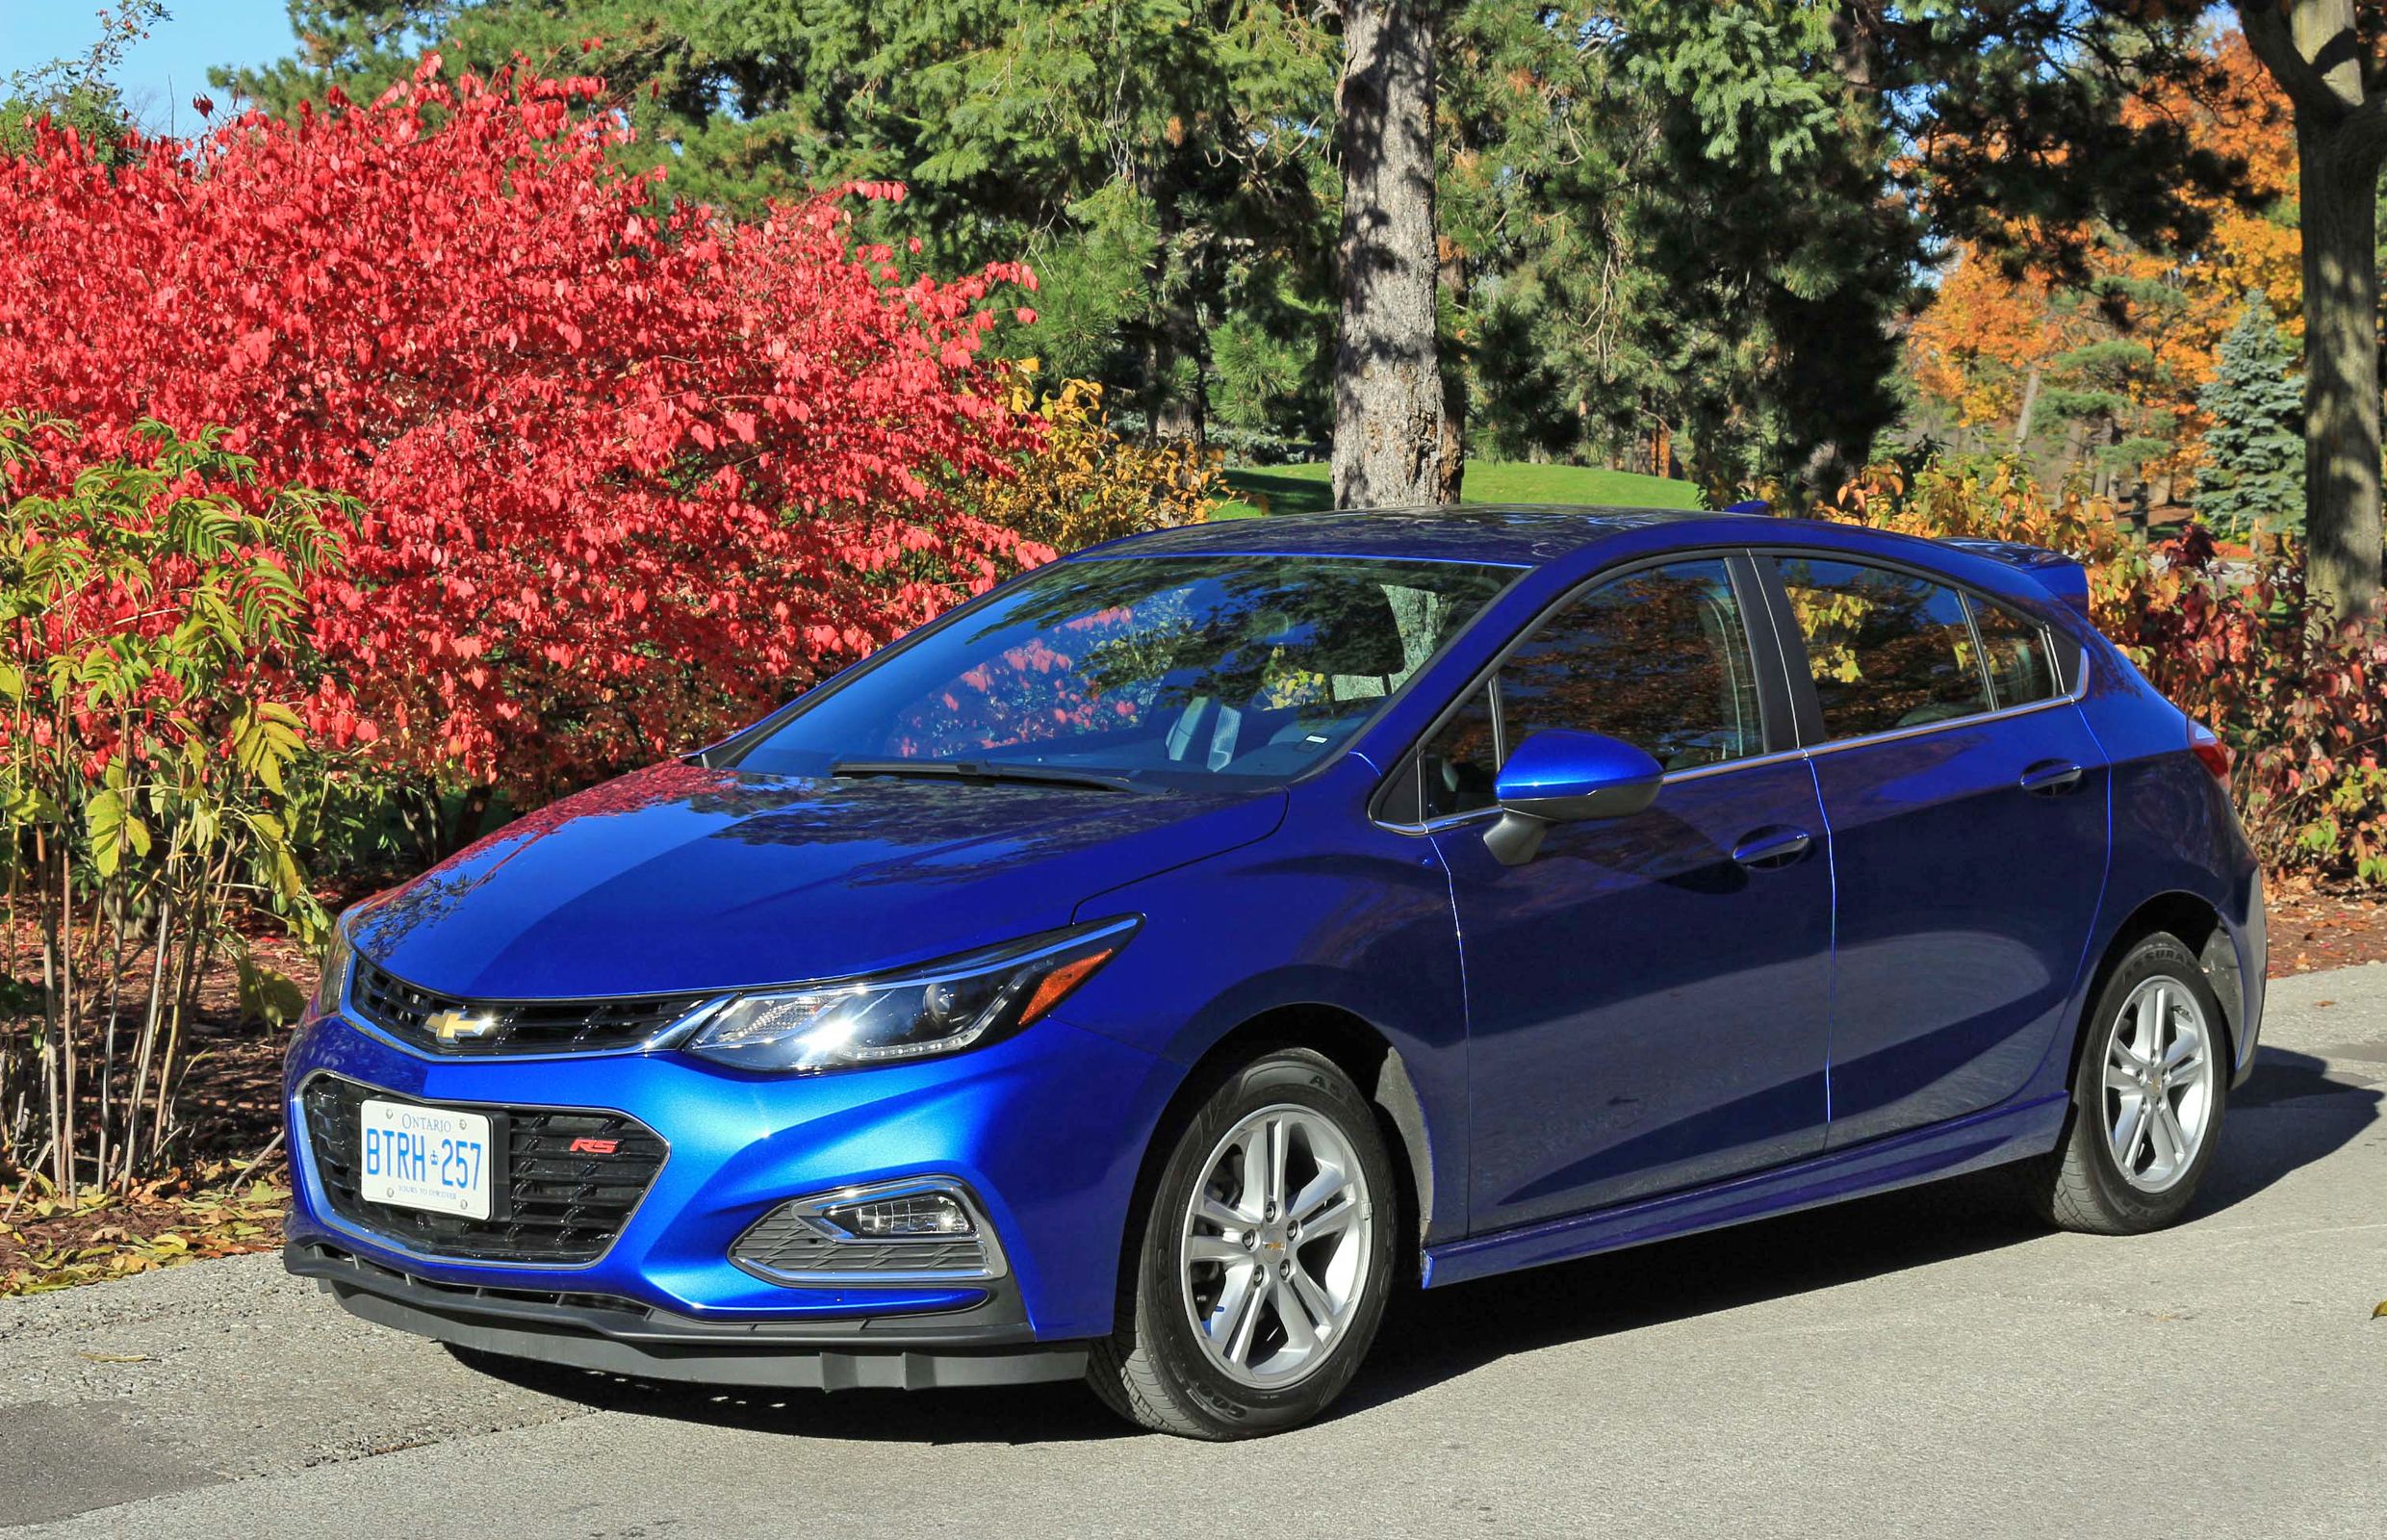 Chevrolet Cruze hatchback will finally be offered in the US